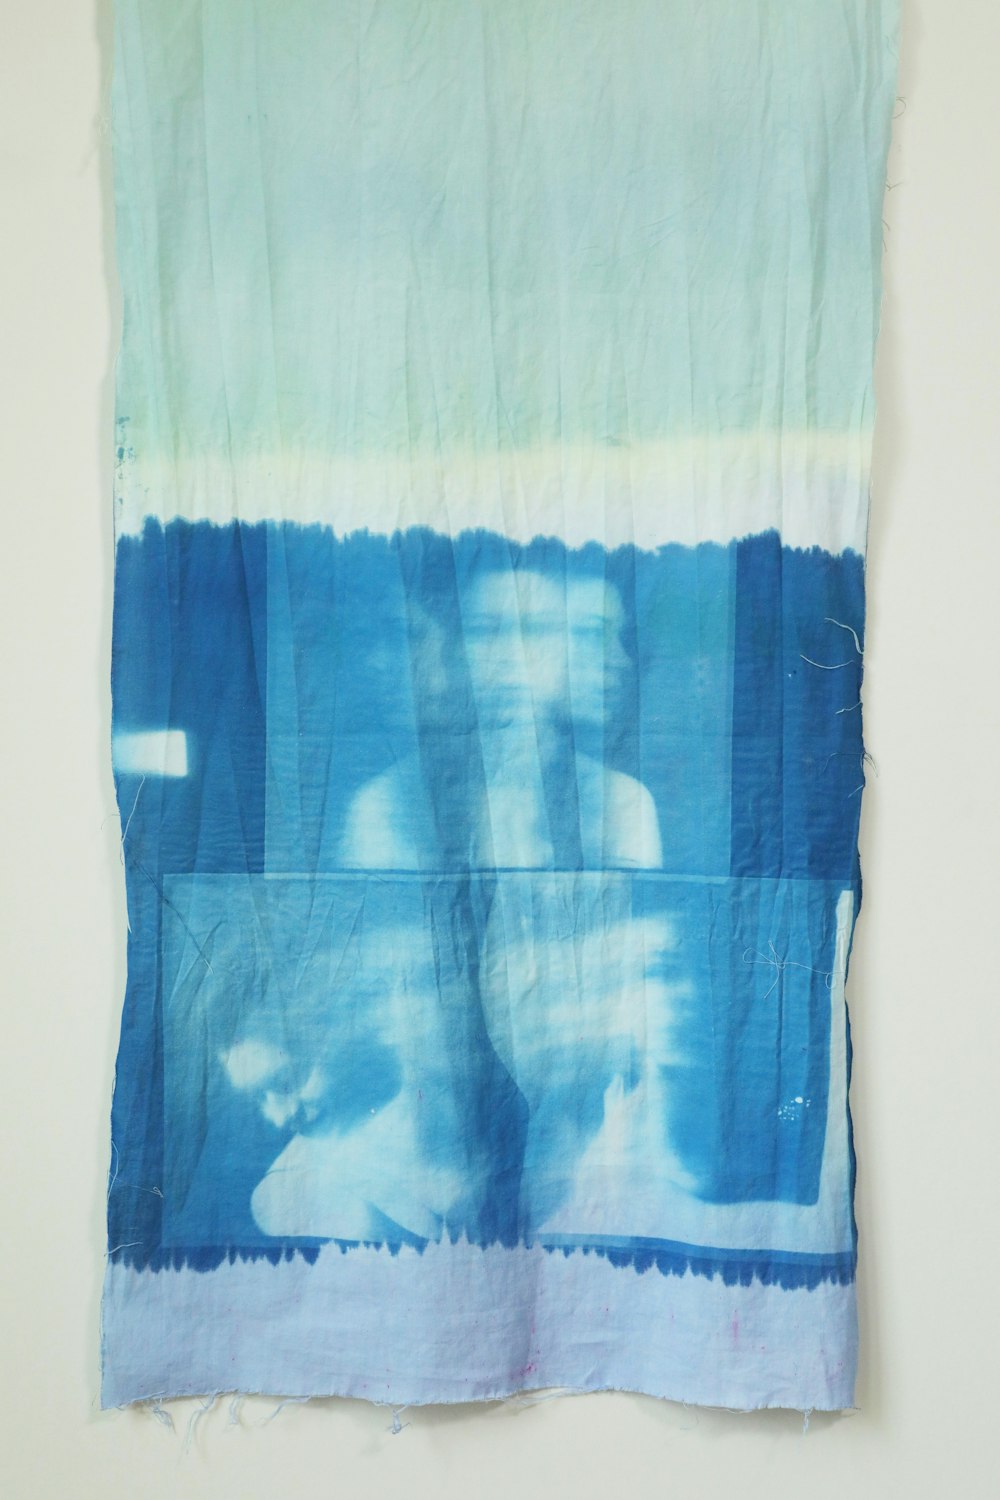 a blue and white piece of cloth hanging on a wall